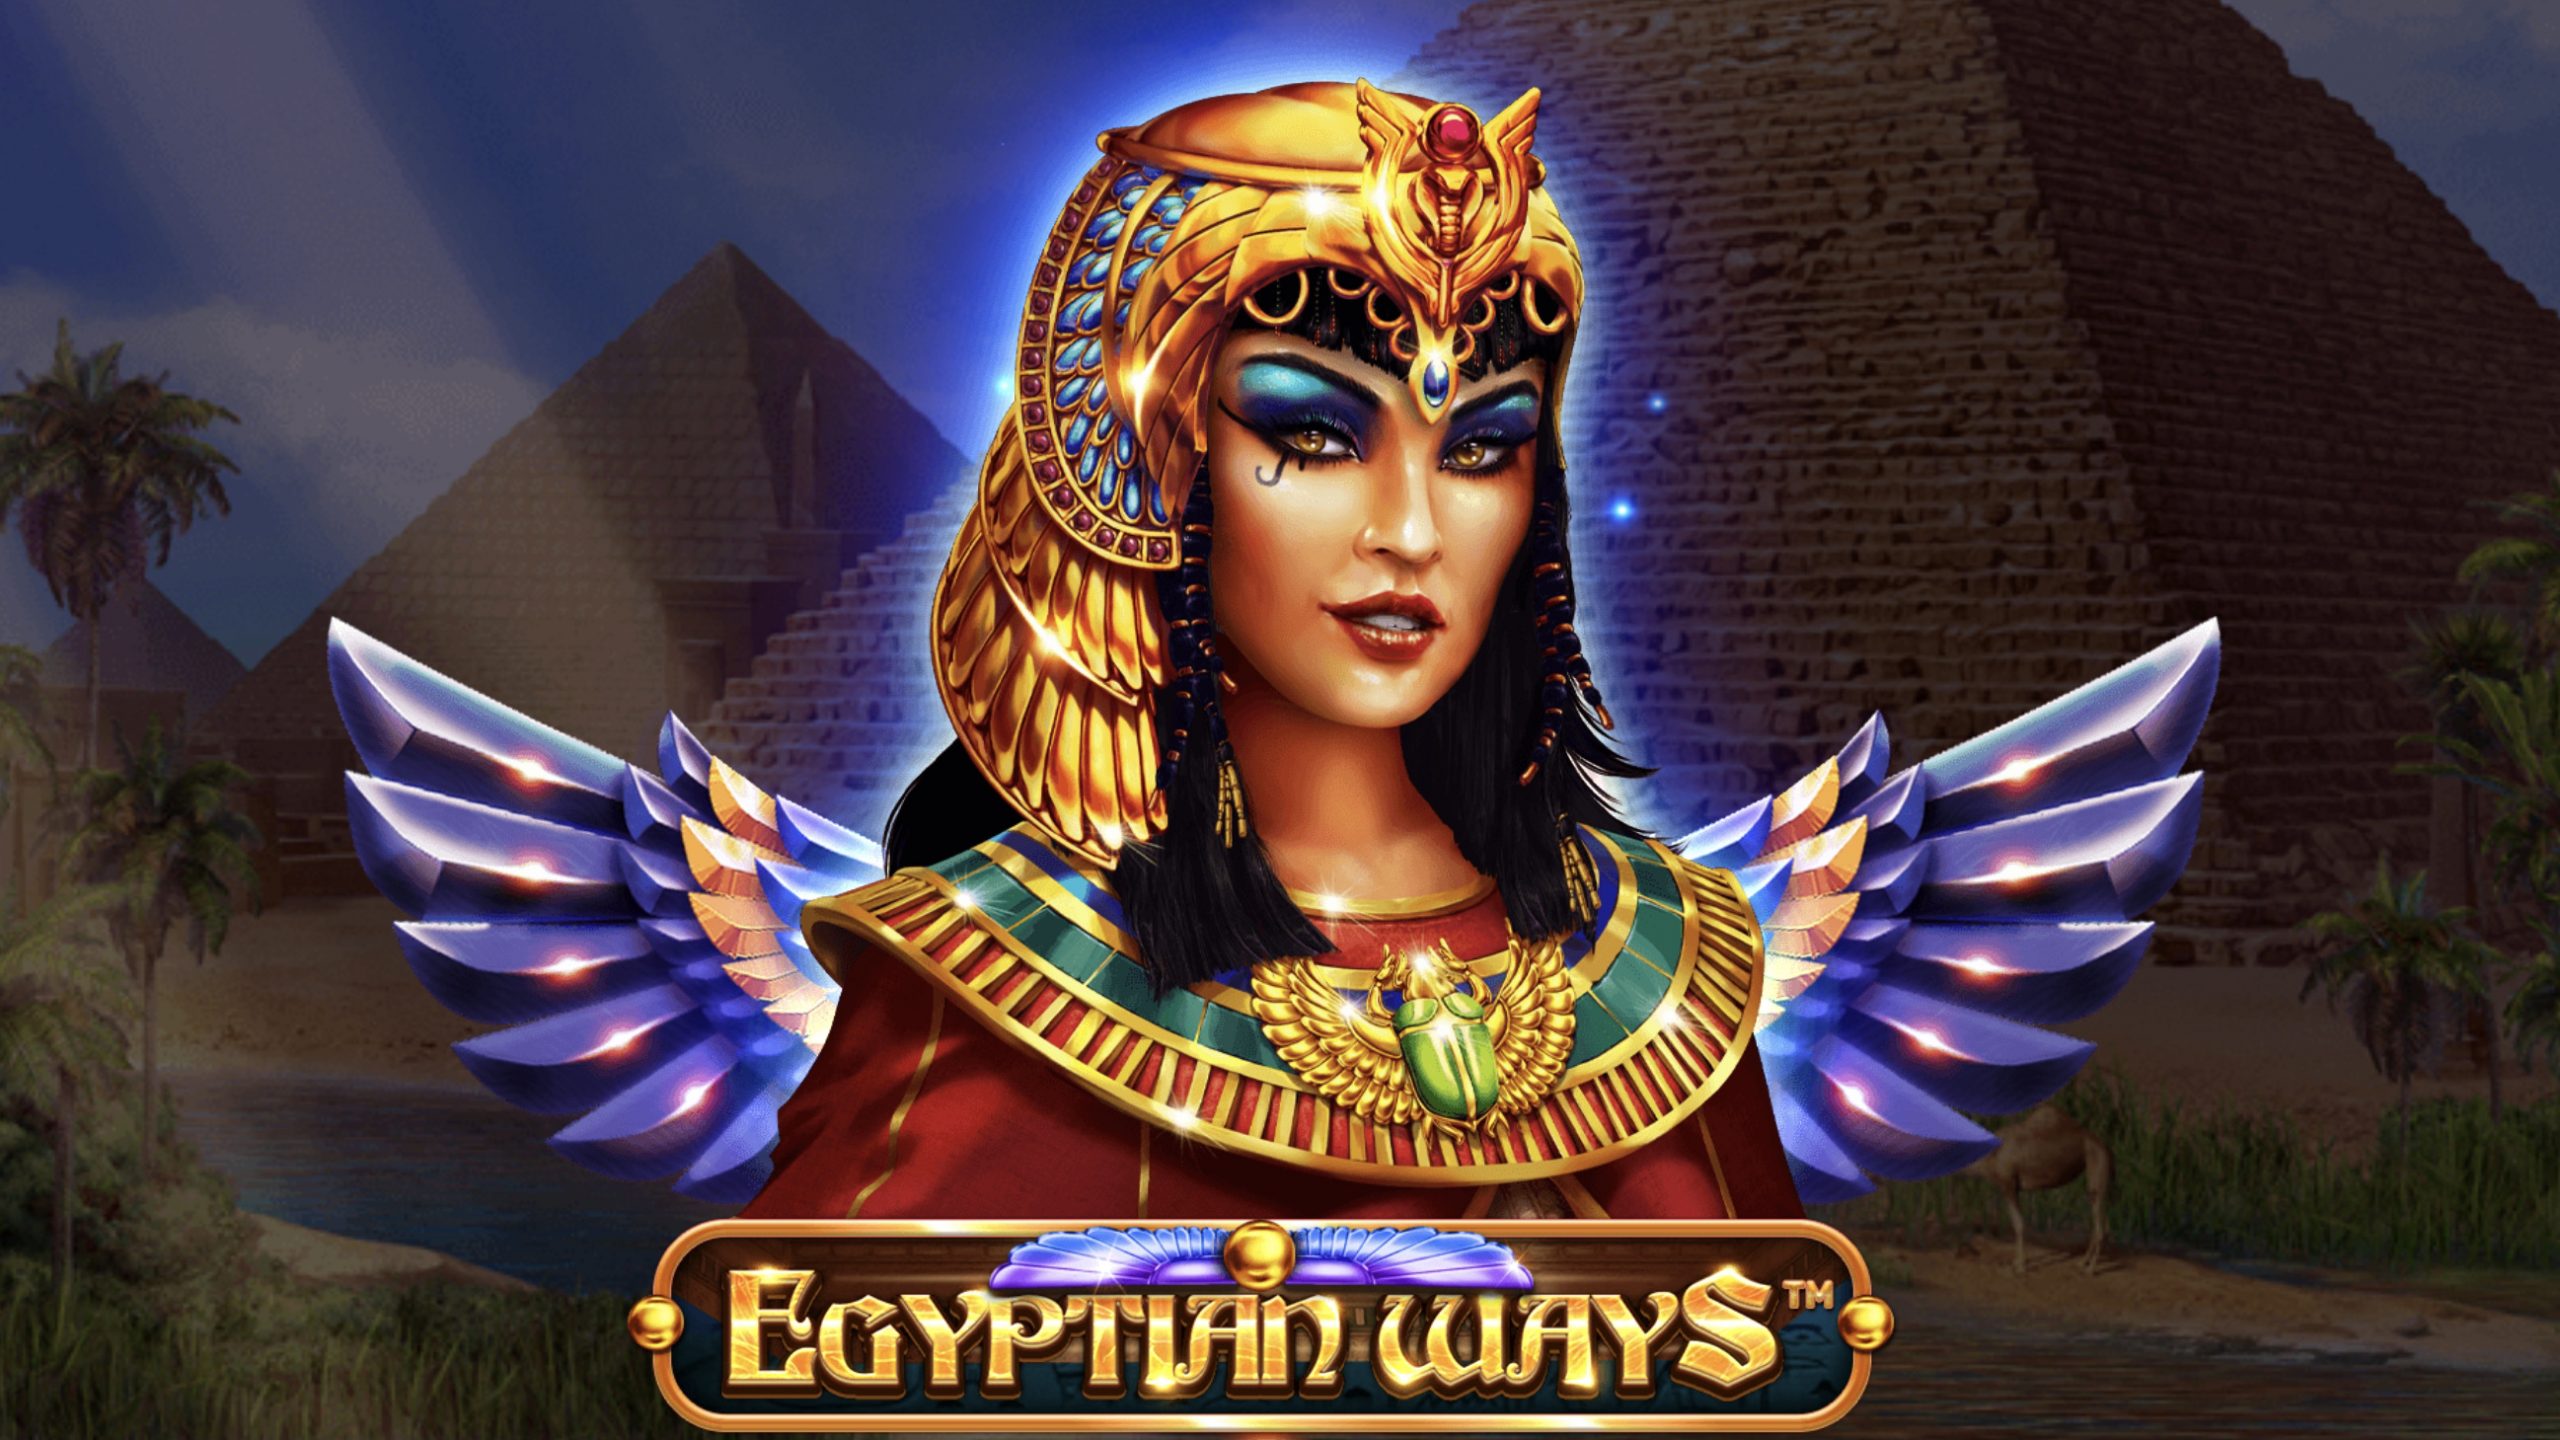 Egyptian Ways is a 5x3, 243-payline video slot that incorporates a bet size ranging from x0.20 minimum to x200 maximum.